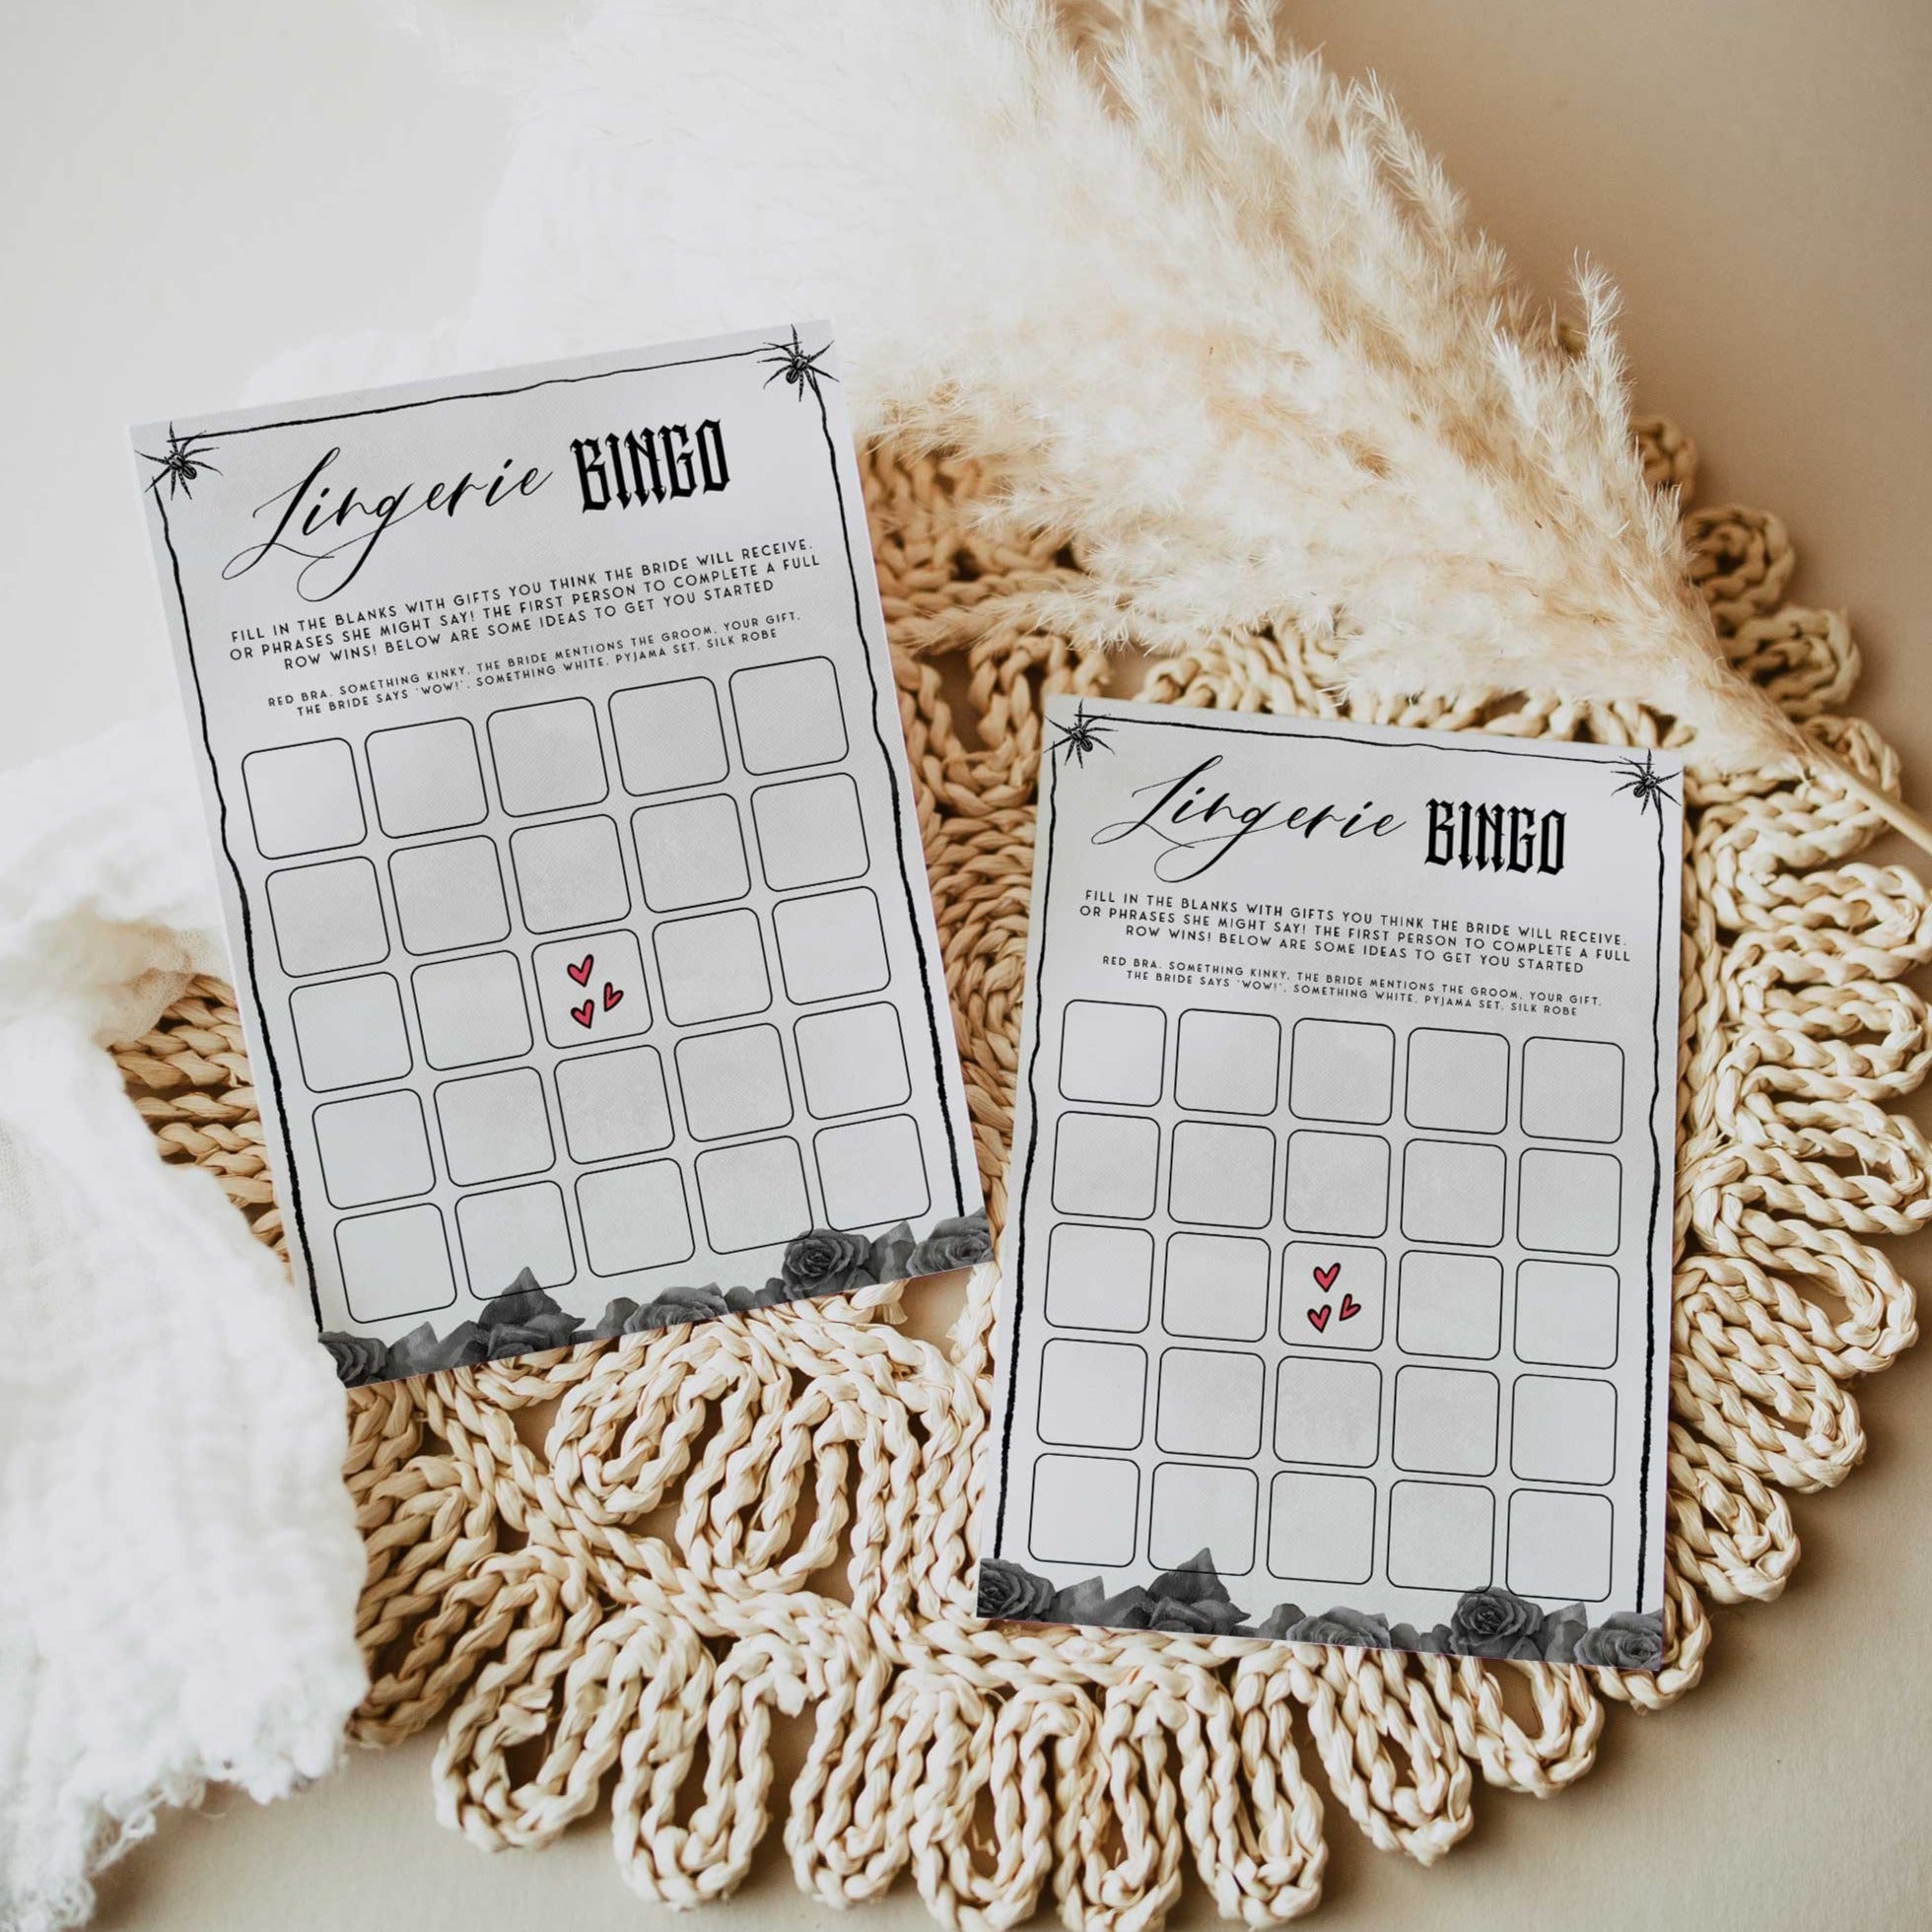 Fully editable and printable bridal shower lingerie bingo game with a gothic design. Perfect for a Bride or Die or Death Us To Party bridal shower themed party